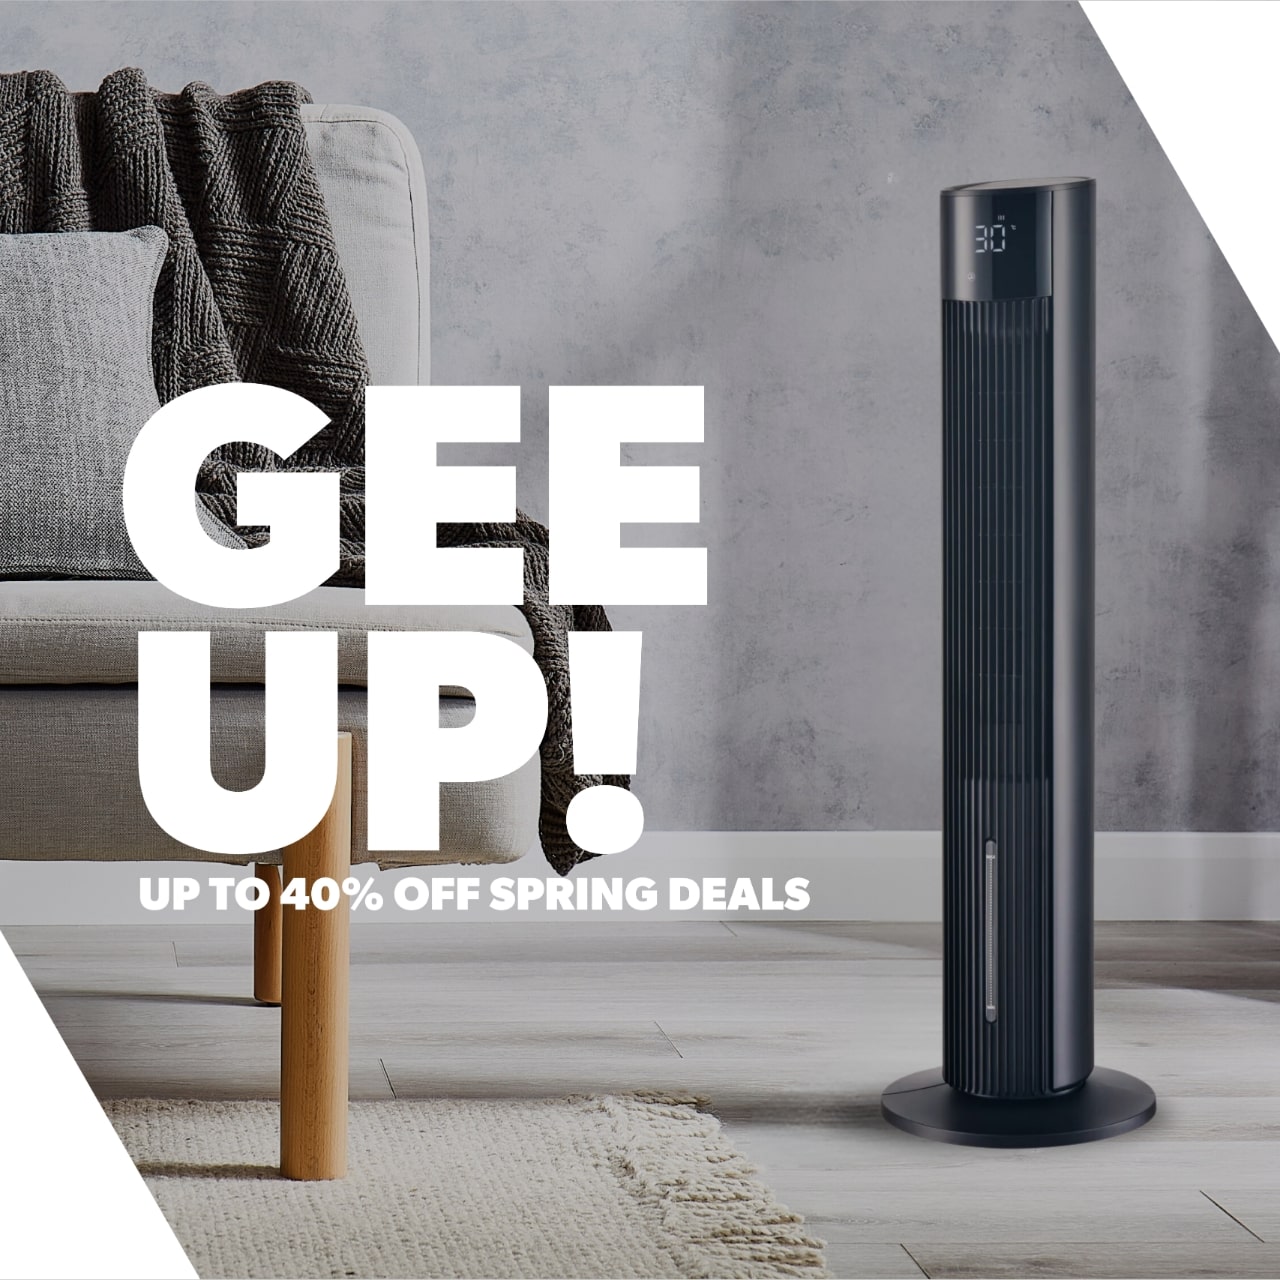 The image shows off the 3-in-1 air cooler and fan in a living room environment next to a sofa with a promotional message next to it about the spring sale